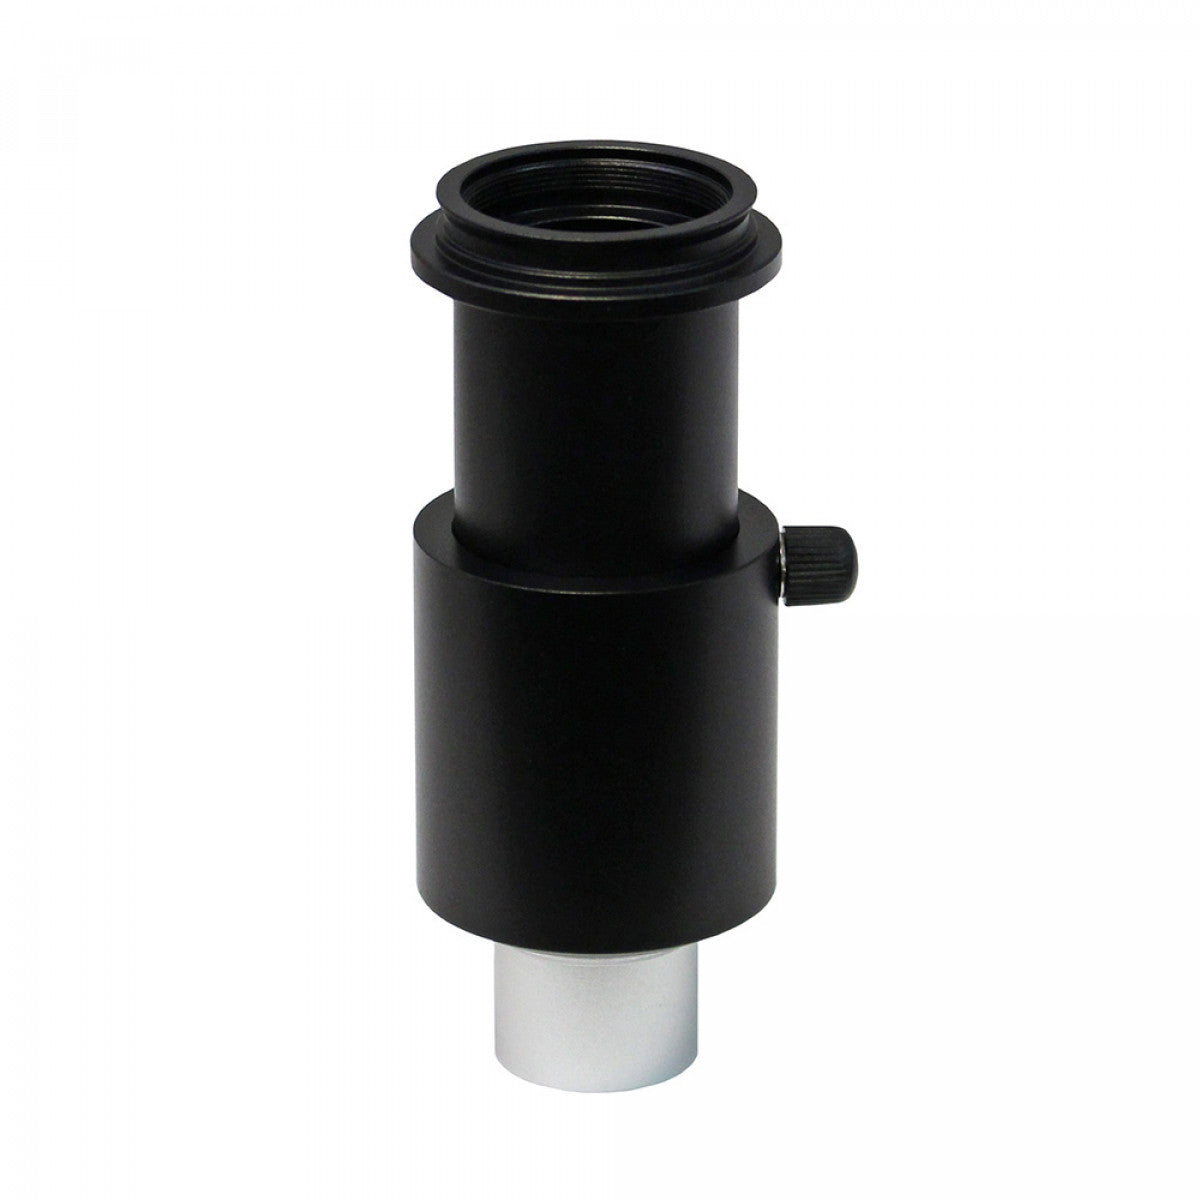 C-Mount Adapters for Accu-Scope EXC-350 Series